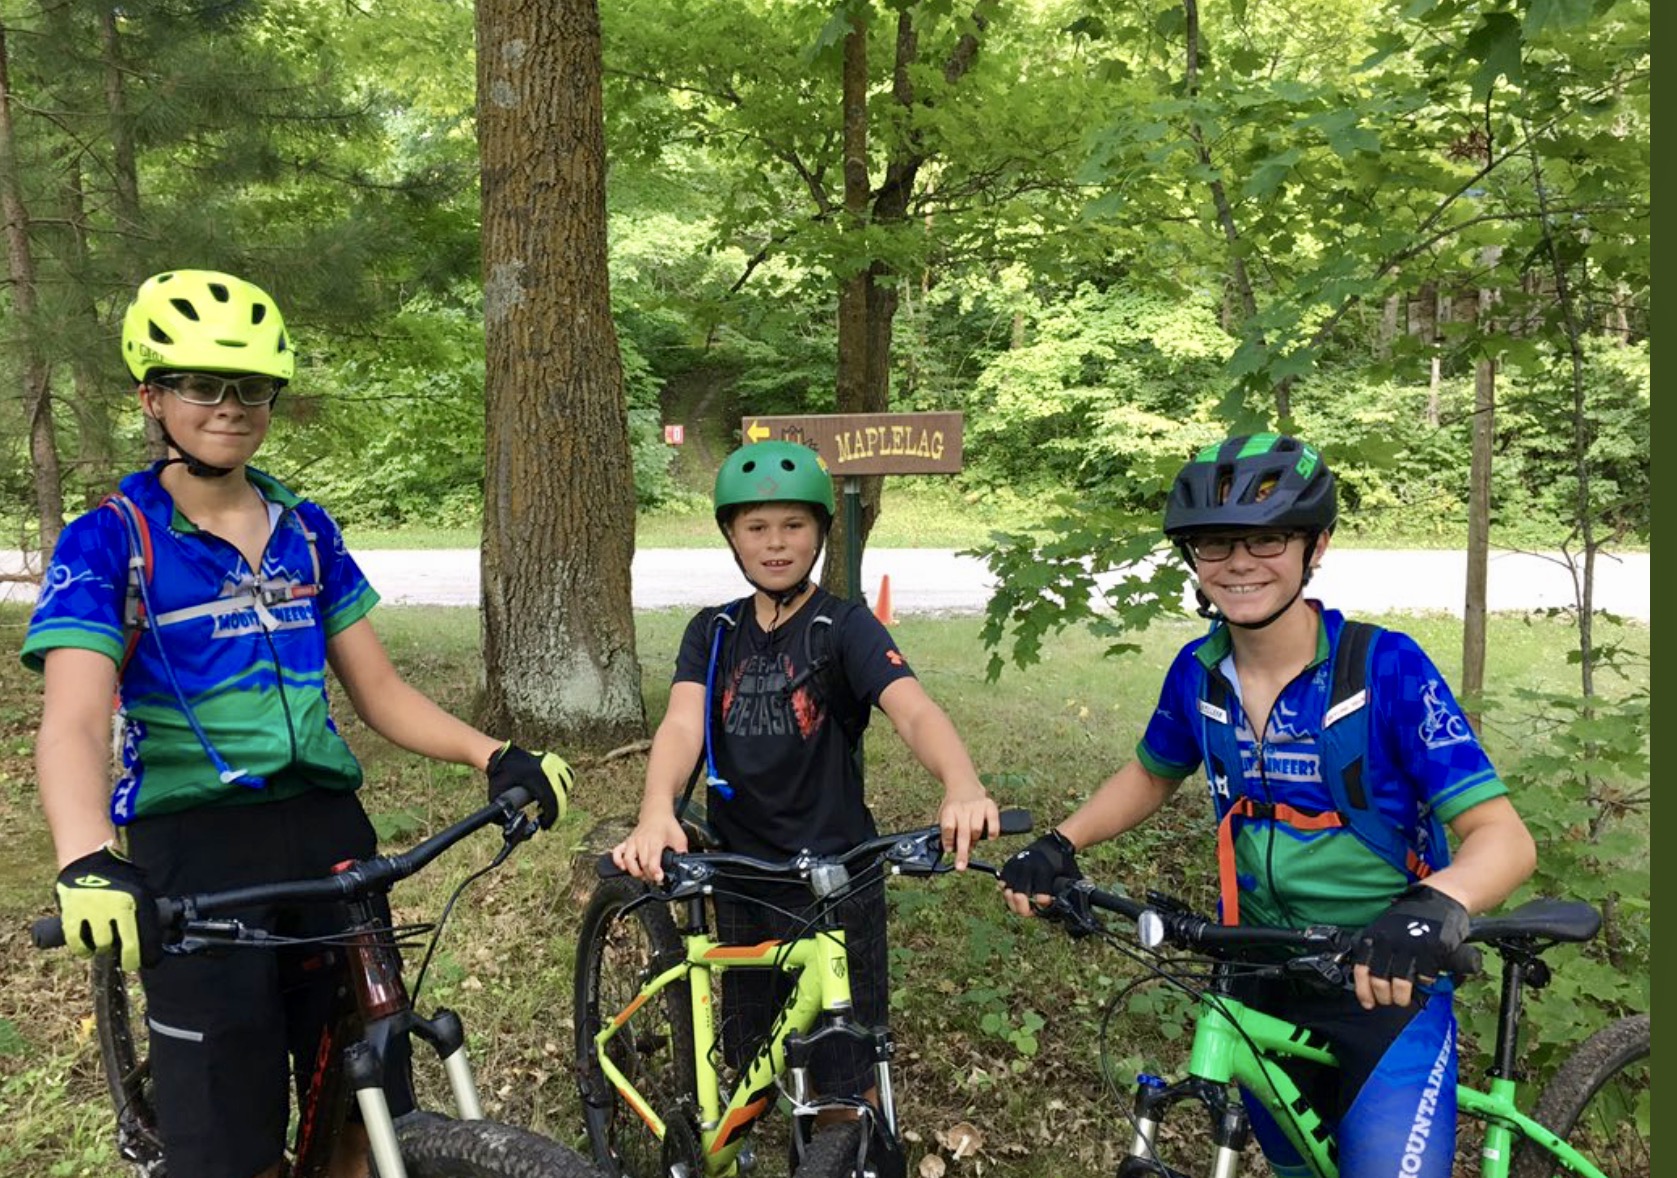 Riders from the Alexandria MTB team checking out the course, August 22nd, 2017.